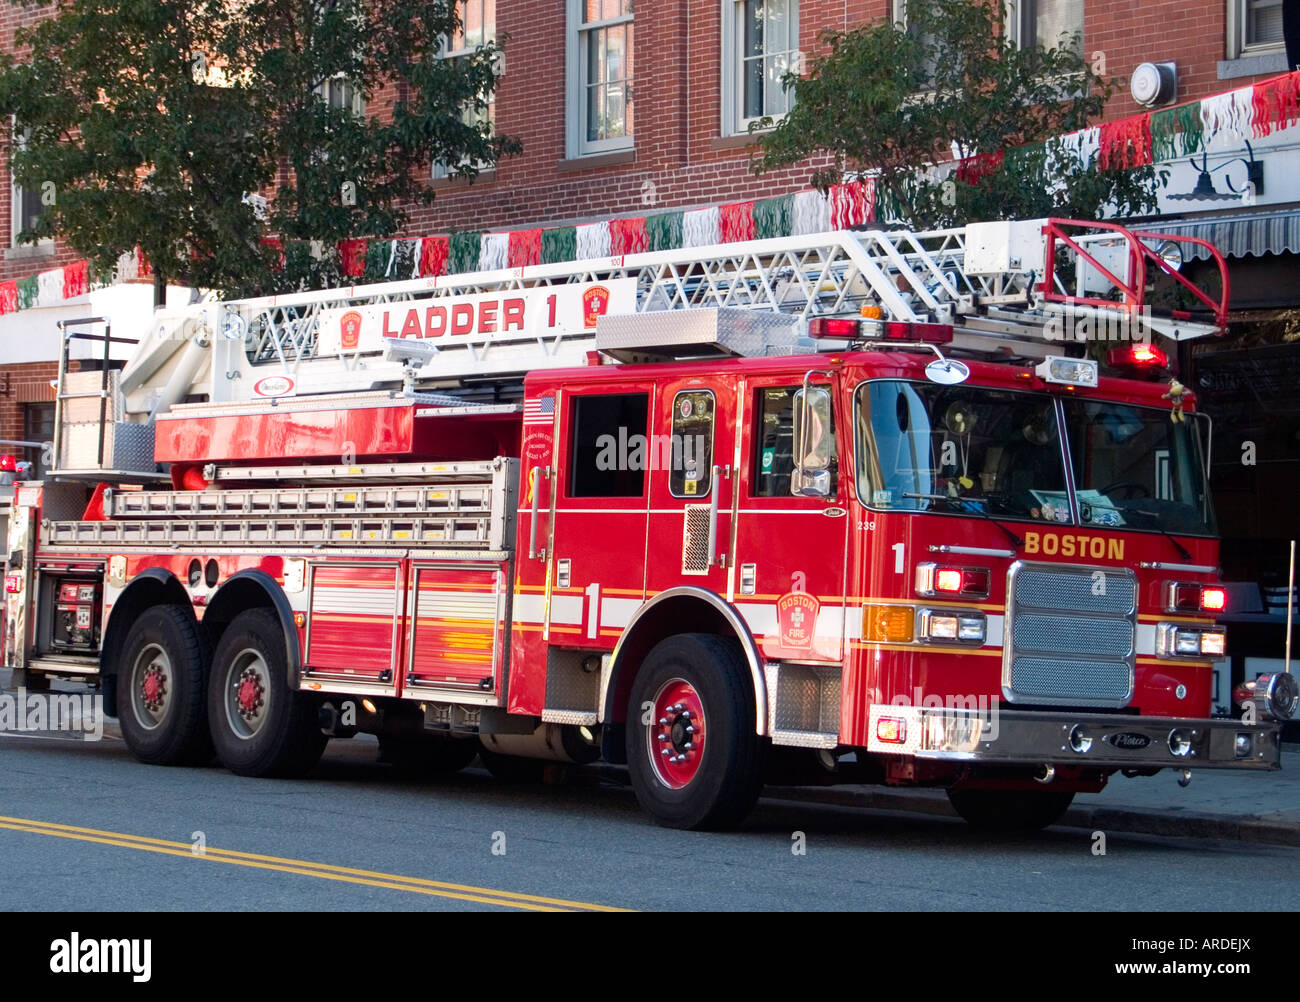 A fire truck from Ladder 1 parked in the Italian District of Boston, Massachusetts USA Stock Photo